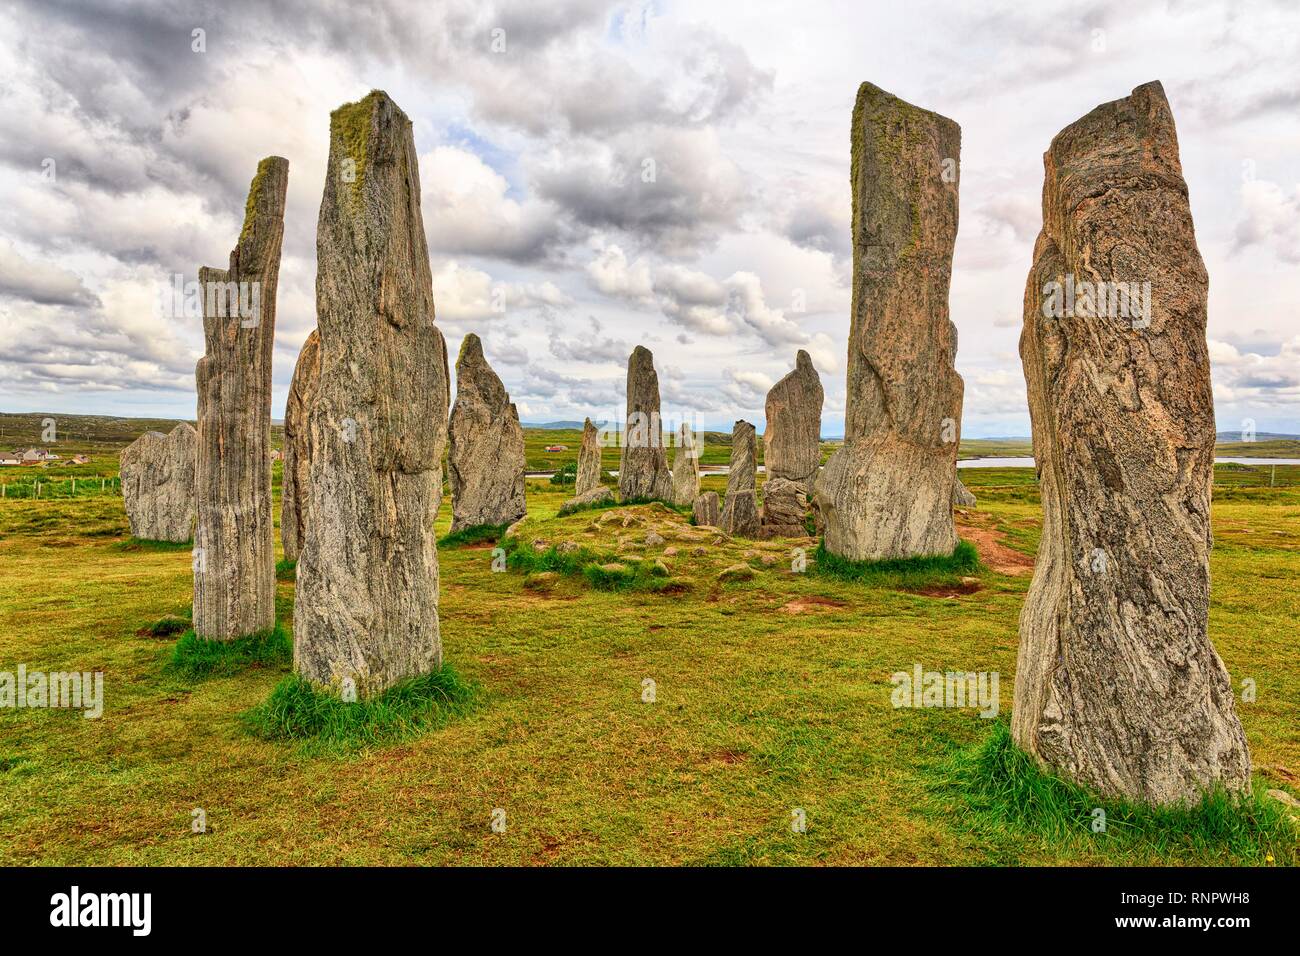 Megalith Stone Formation Callanish Standing Stones, Stone Circle under a Cloudy Sky, Lewis and Harris Island, Outer Hebrides Stock Photo